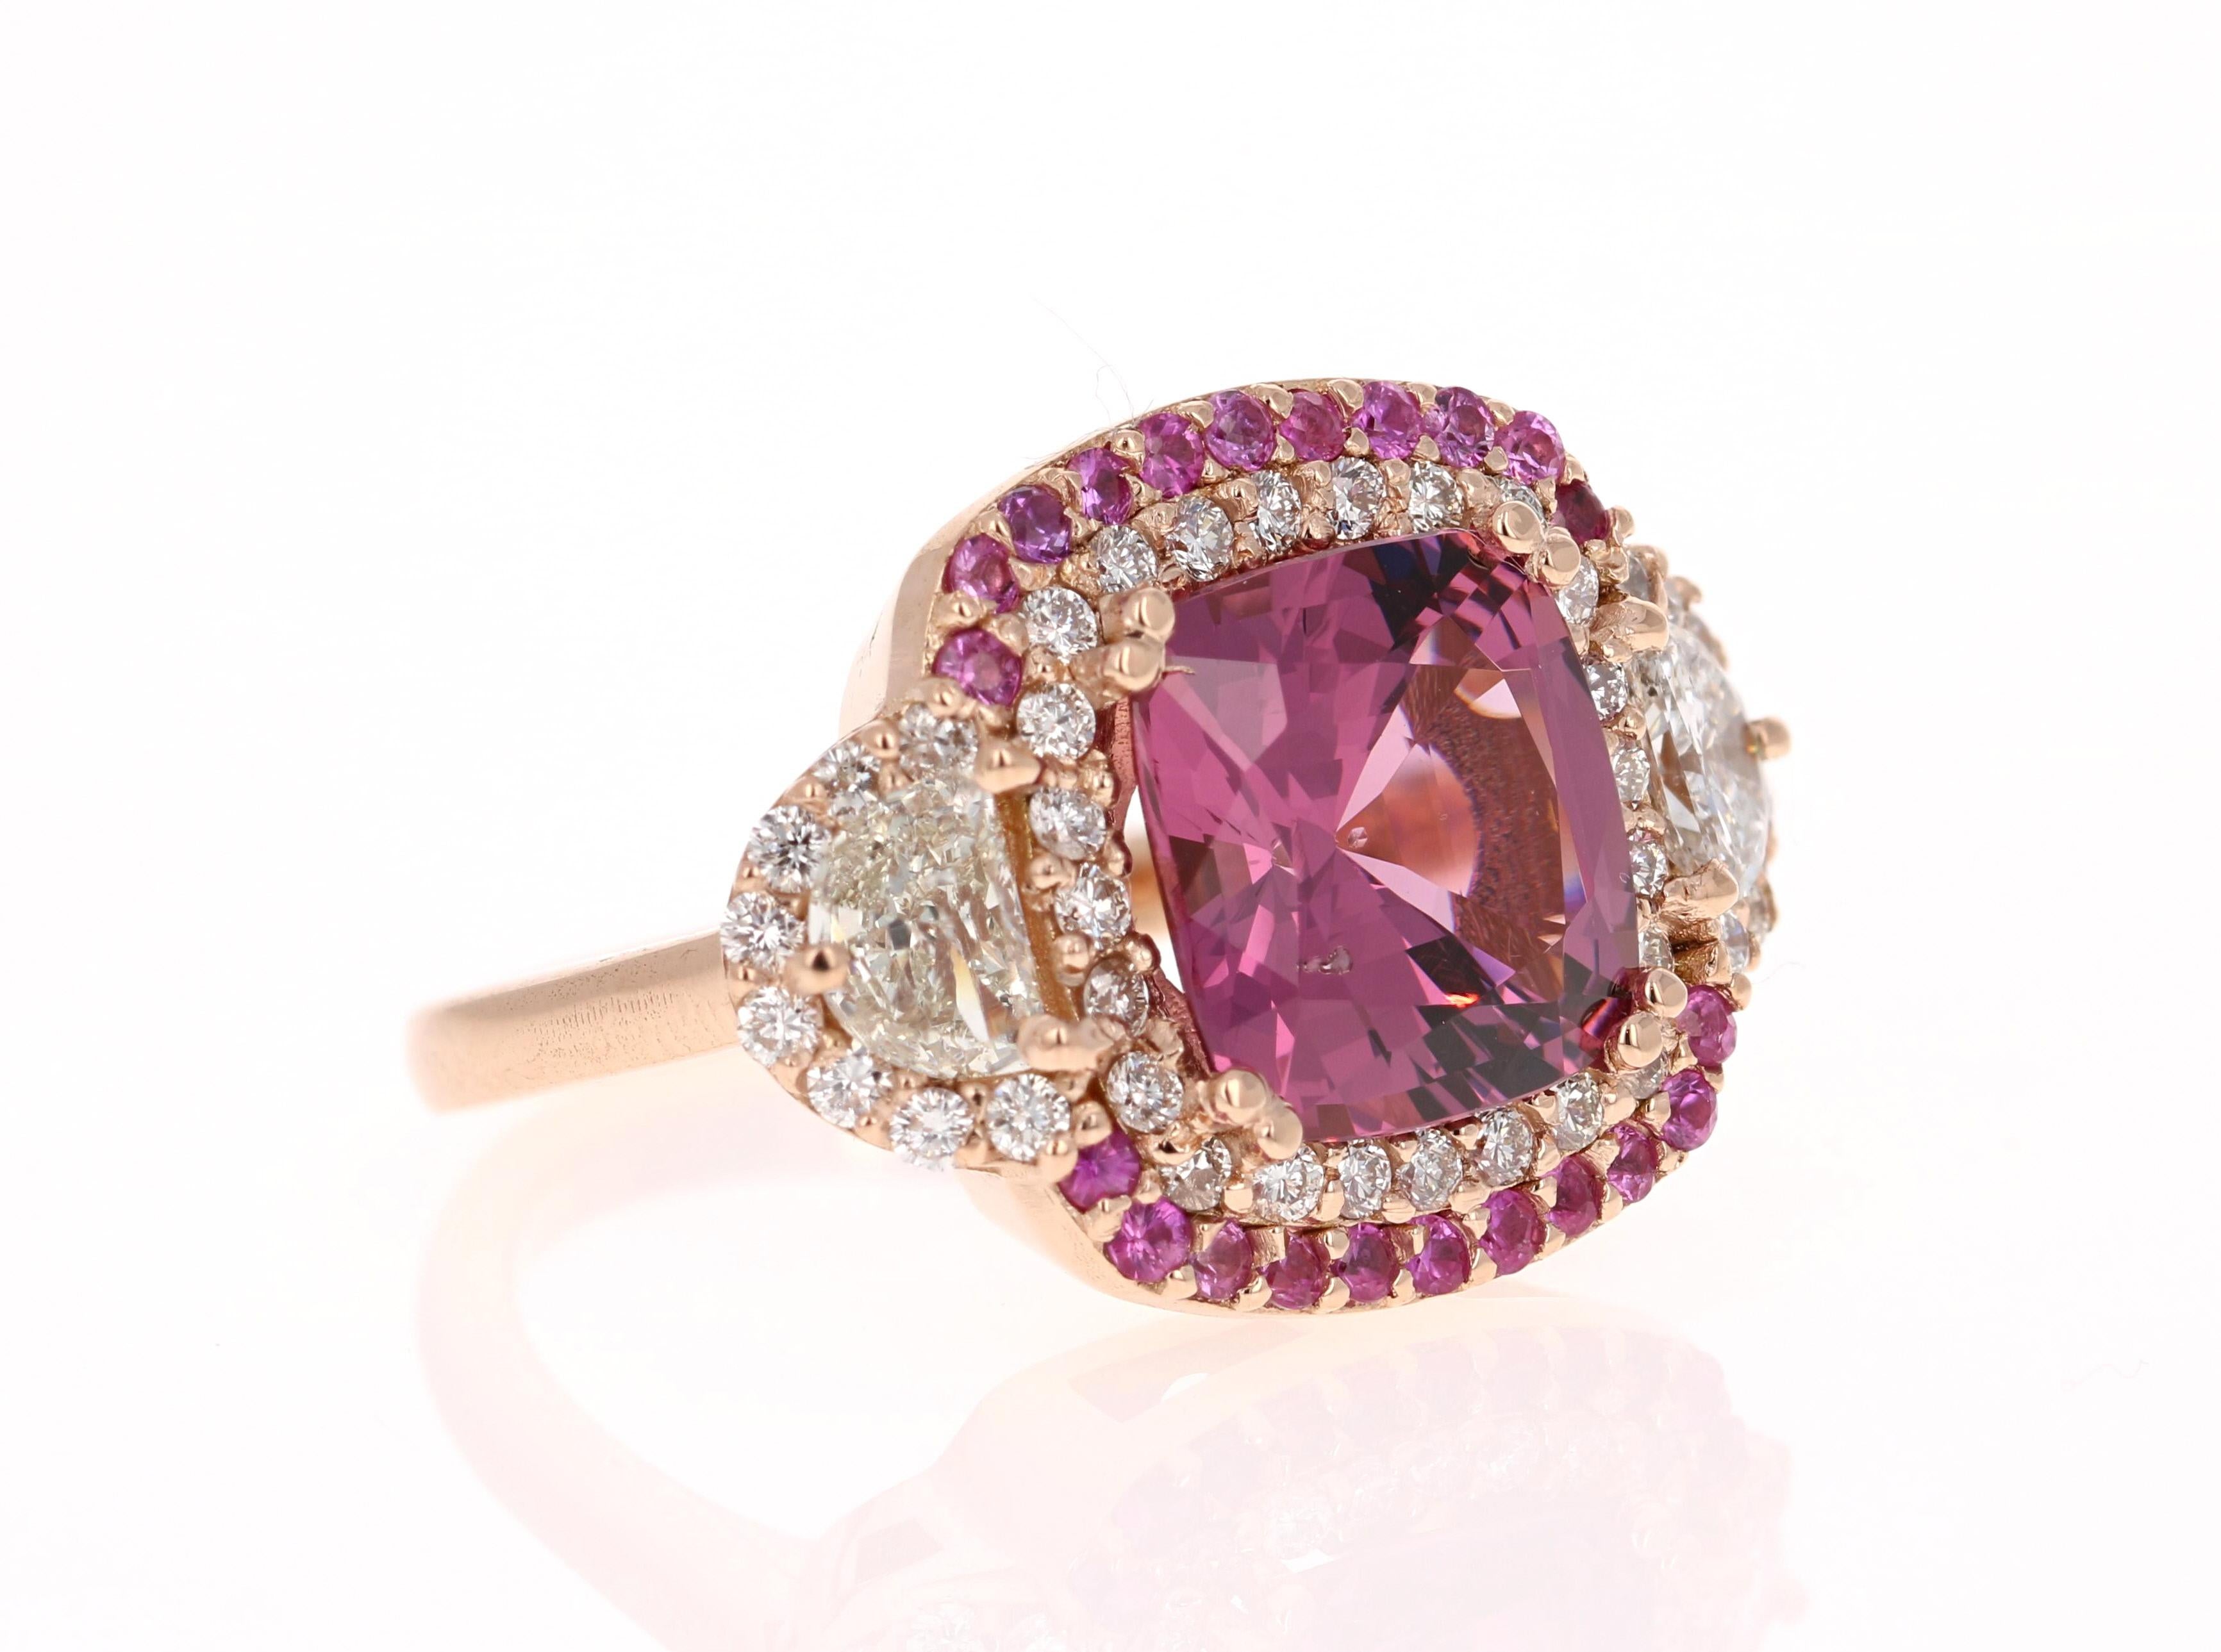 This ring has a stunning Square-Cushion Cut Spinel that weighs 4.95 Carats and has 40 Round Cut Diamonds that weigh 0.59 Carats, along with 2 Half Moon Cut Diamonds that weigh 0.70 Carats. The Clarity and Color of the diamonds are VS2-H. The Spinel